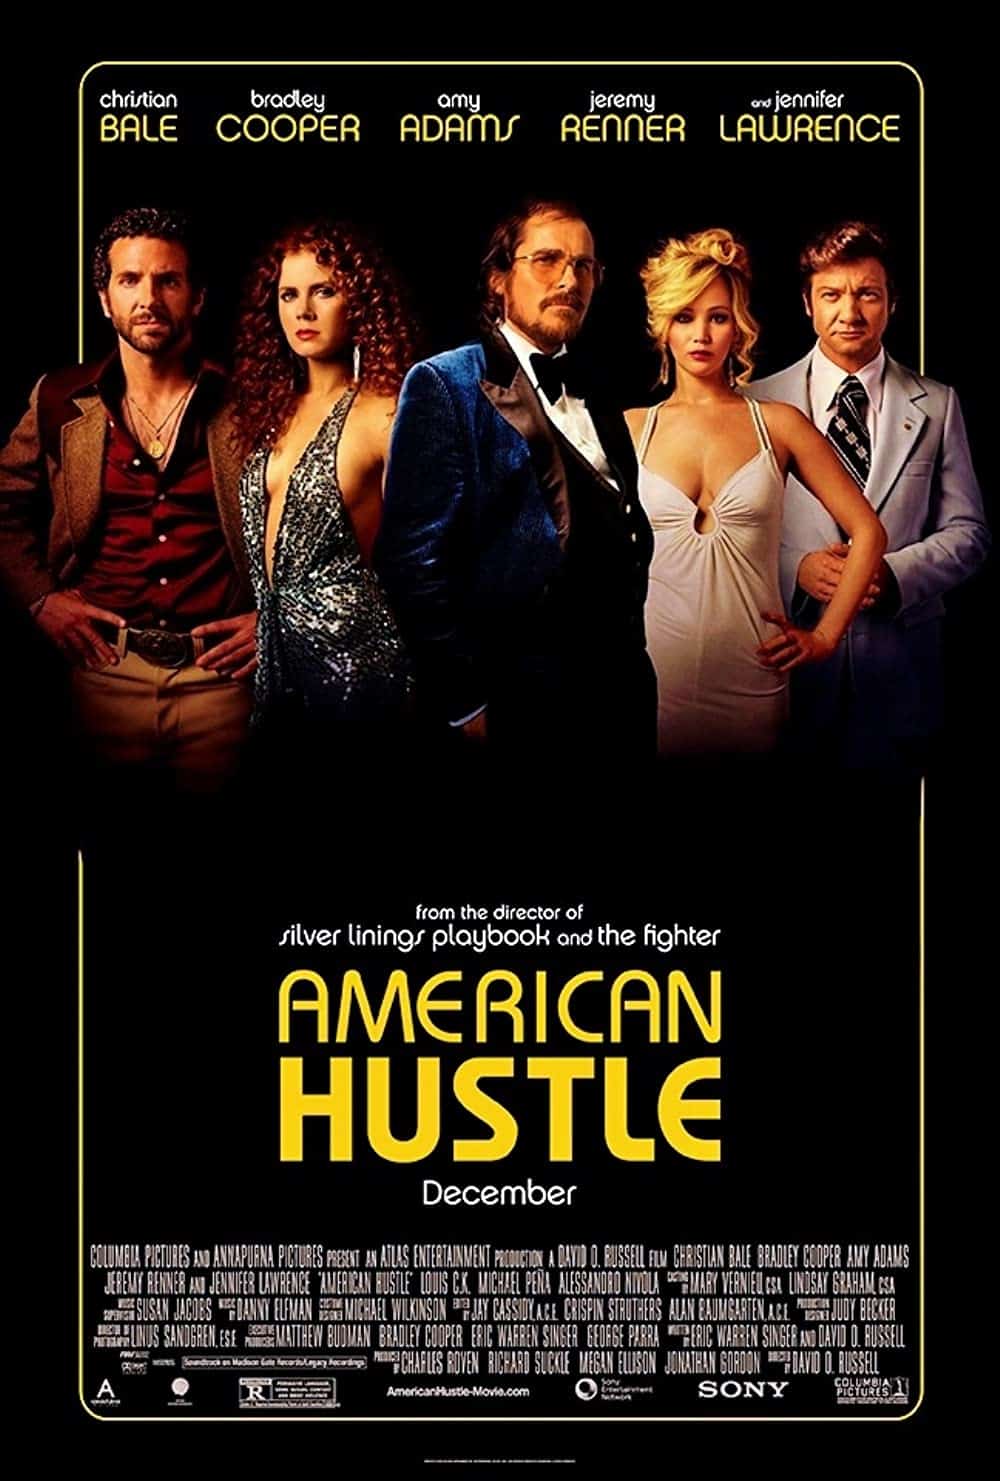 American Hustle (2013) 15 Best Con Movies to Add in Your Watchlist